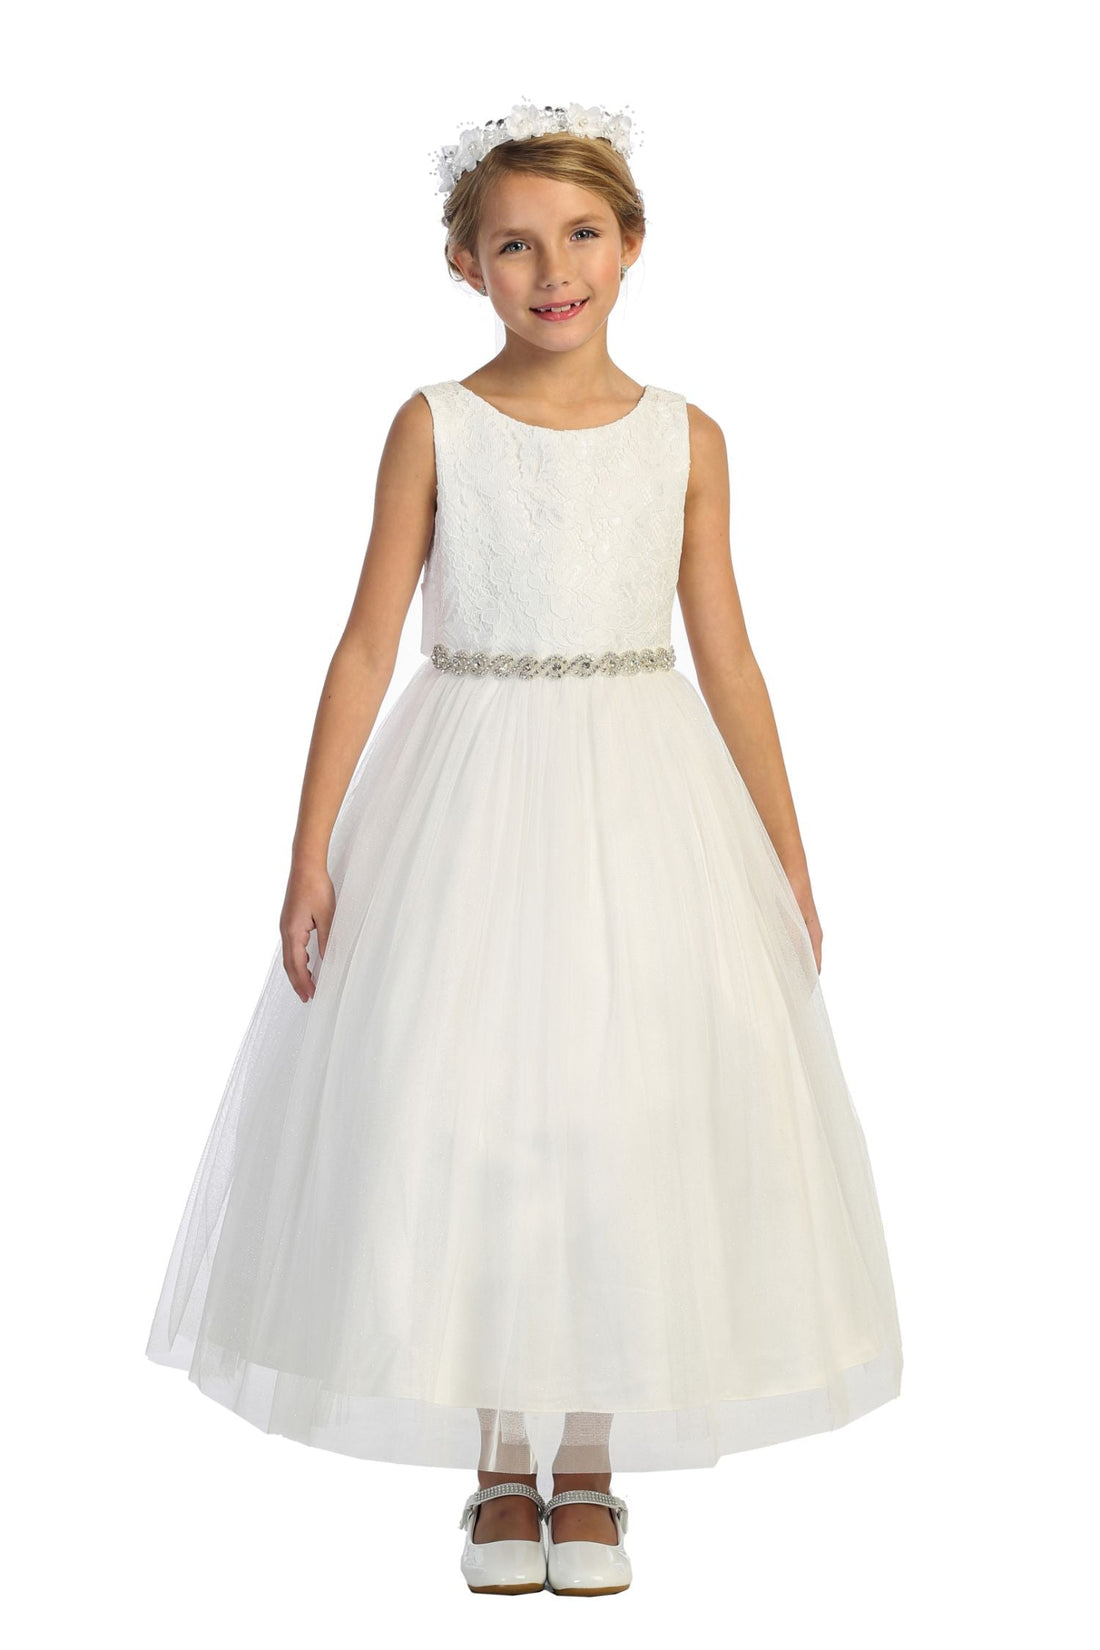 Girl Party Waterfall Dress by AS494 Kids Dream - Girl Formal Dresses